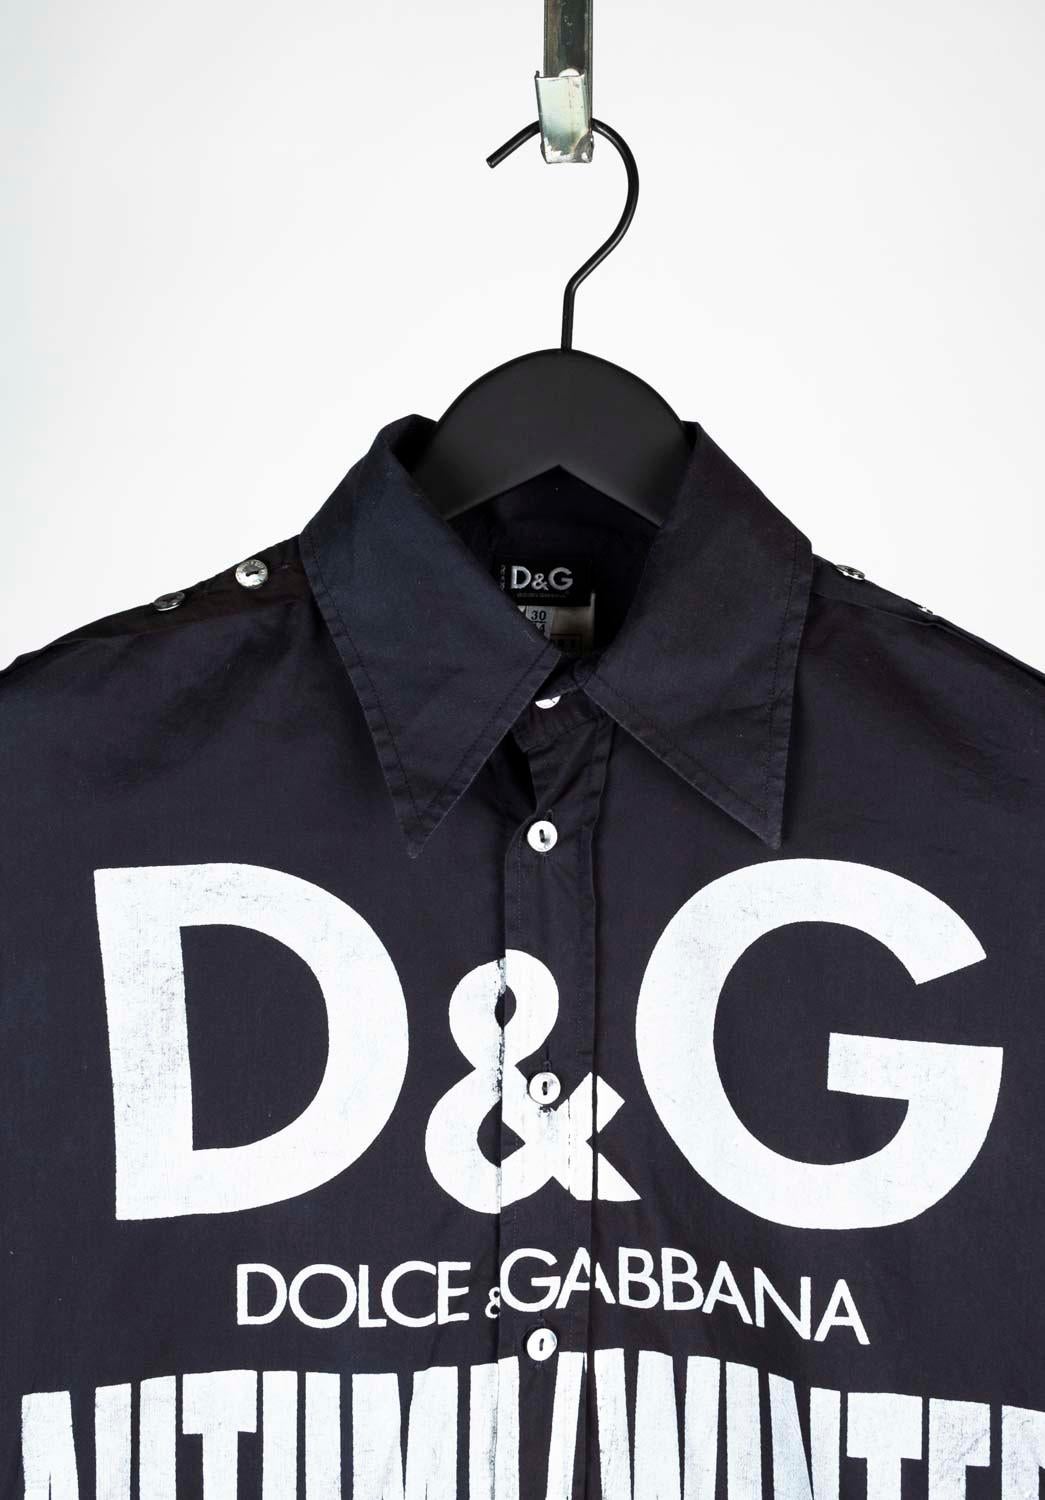 100% genuine vintage Dolce&Gabbana Men Runway Shirt 
Color: dark blue
(An actual color may a bit vary due to individual computer screen interpretation)
Material: 68% cotton, 32% polyamide
Tag size: 30/44 (Small/Slim Medium)
This shirt is great